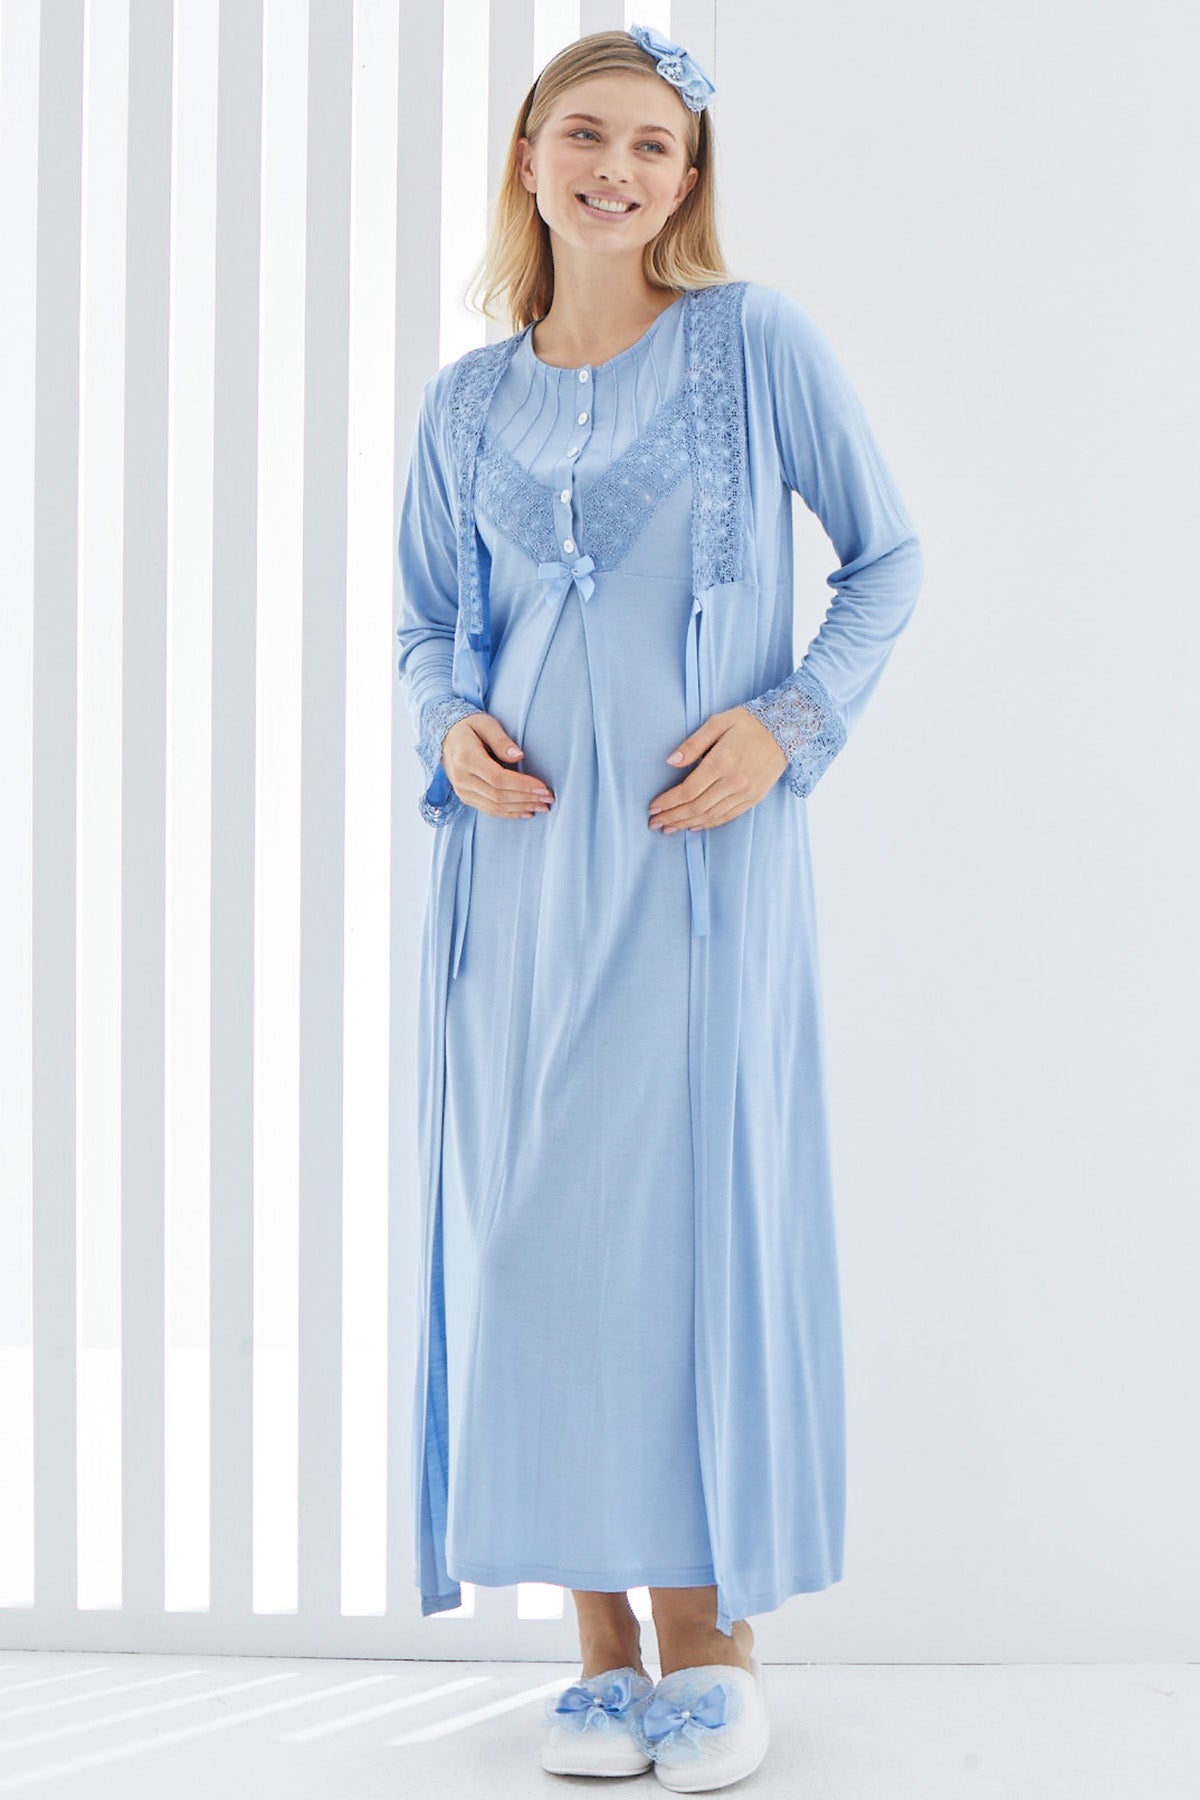 Shopymommy 2270 Lace Detailed Maternity & Nursing Nightgown With Robe Blue